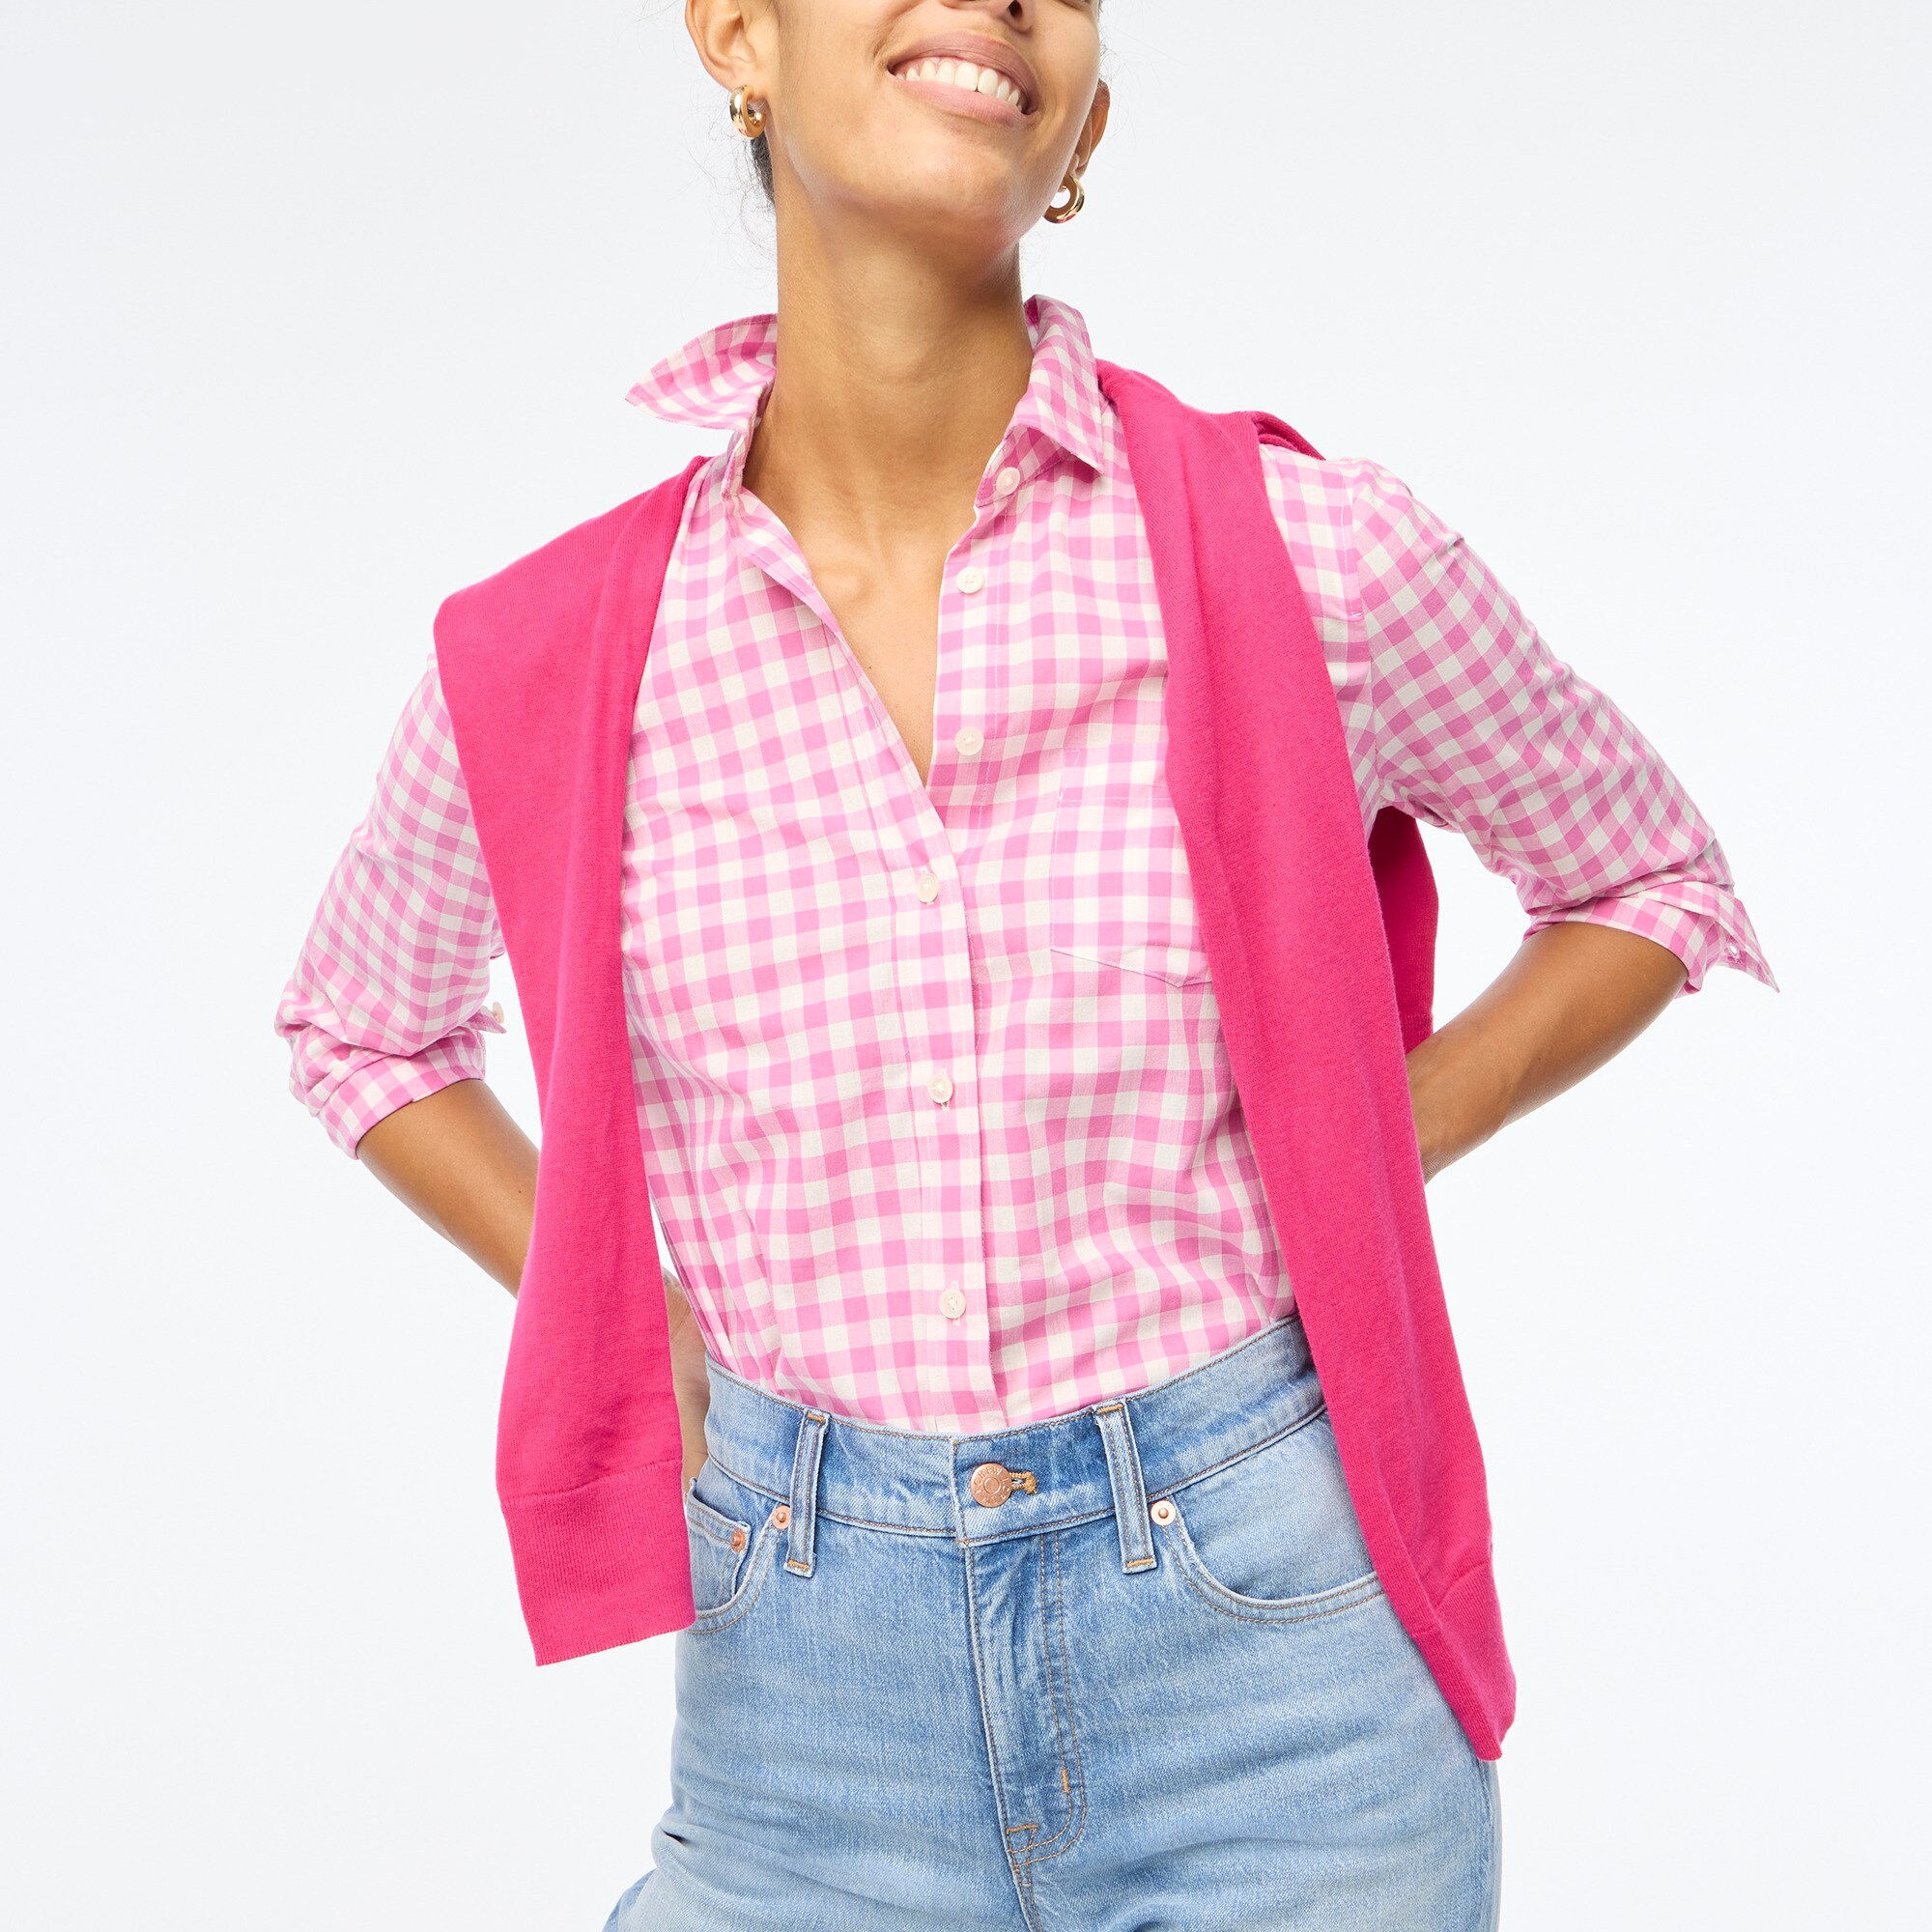  Petite gingham lightweight cotton shirt in signature fit